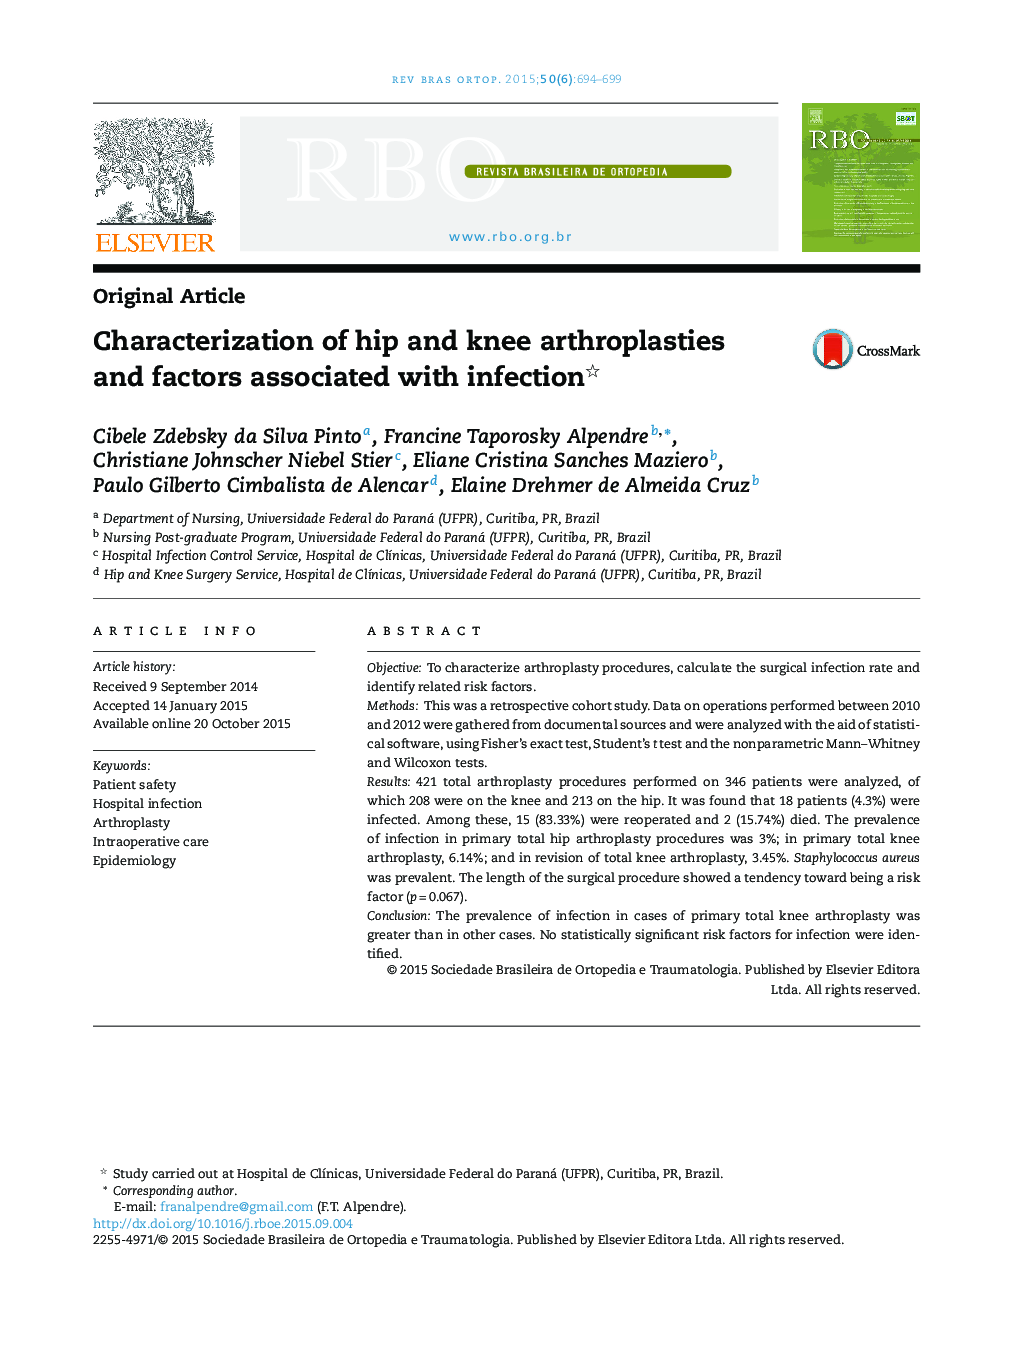 Characterization of hip and knee arthroplasties and factors associated with infection 